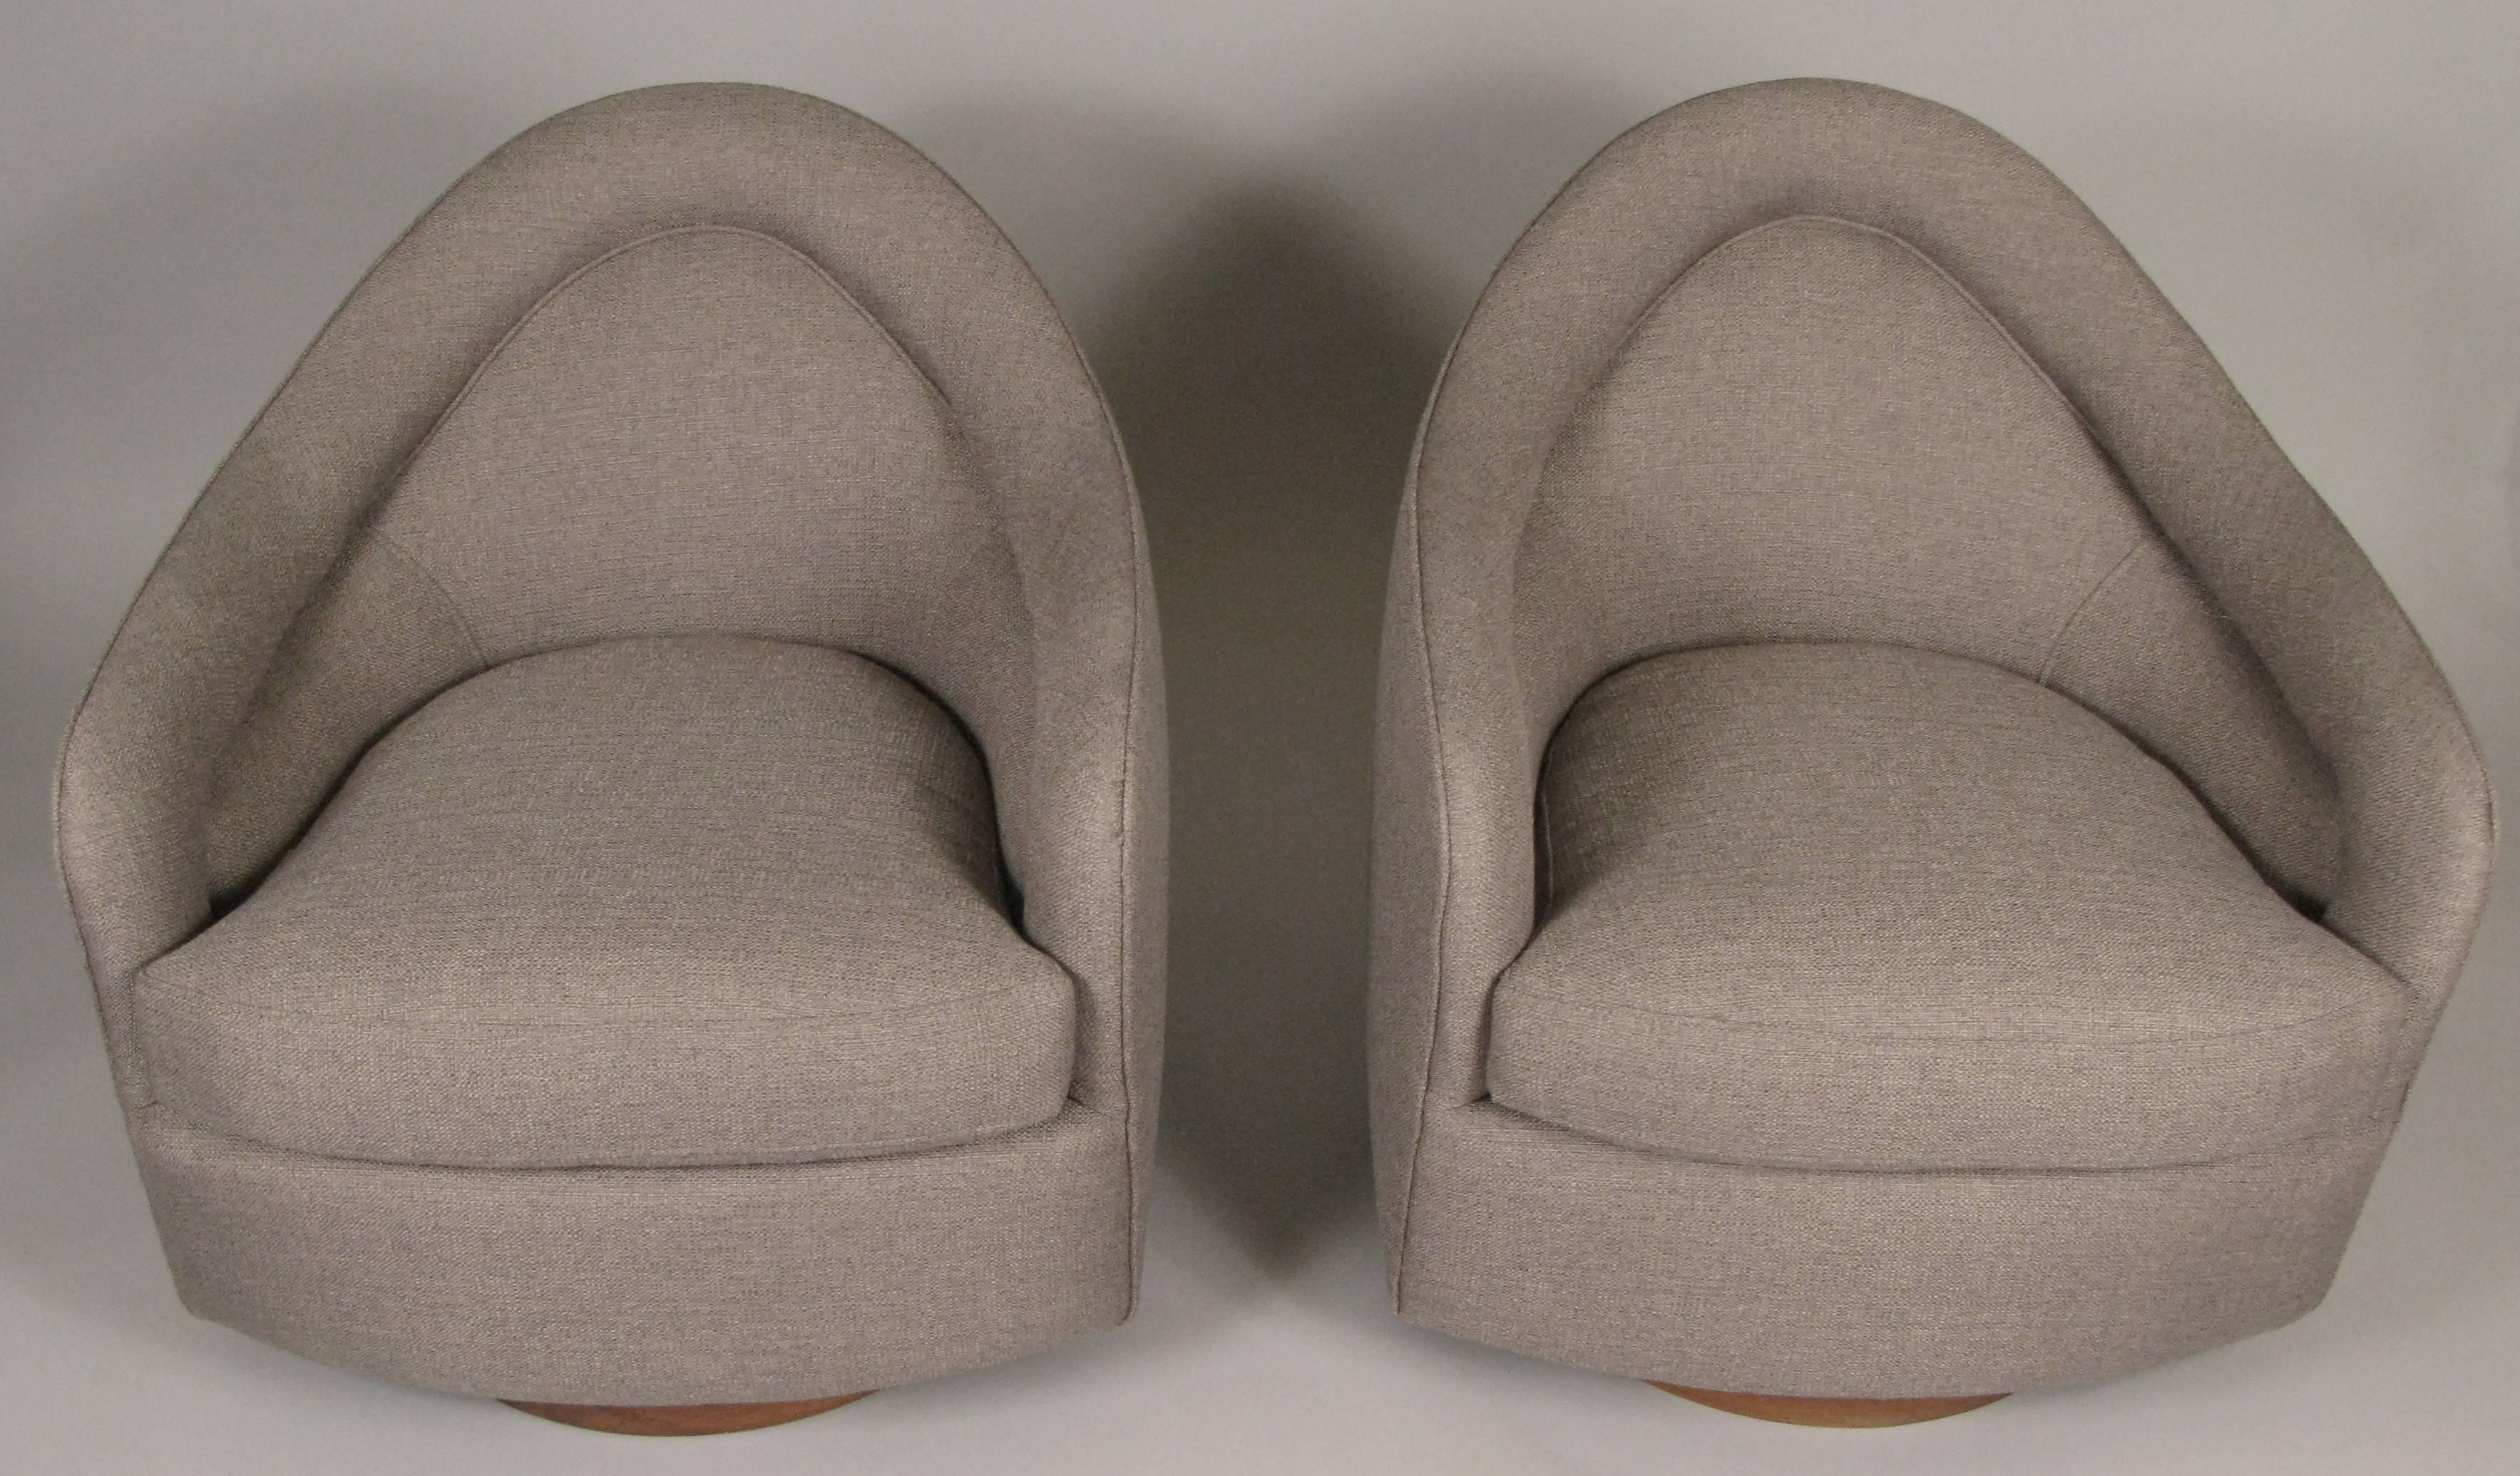 American Pair of Classic Swivel Lounge Chairs by Milo Baughman for Thayer Coggin